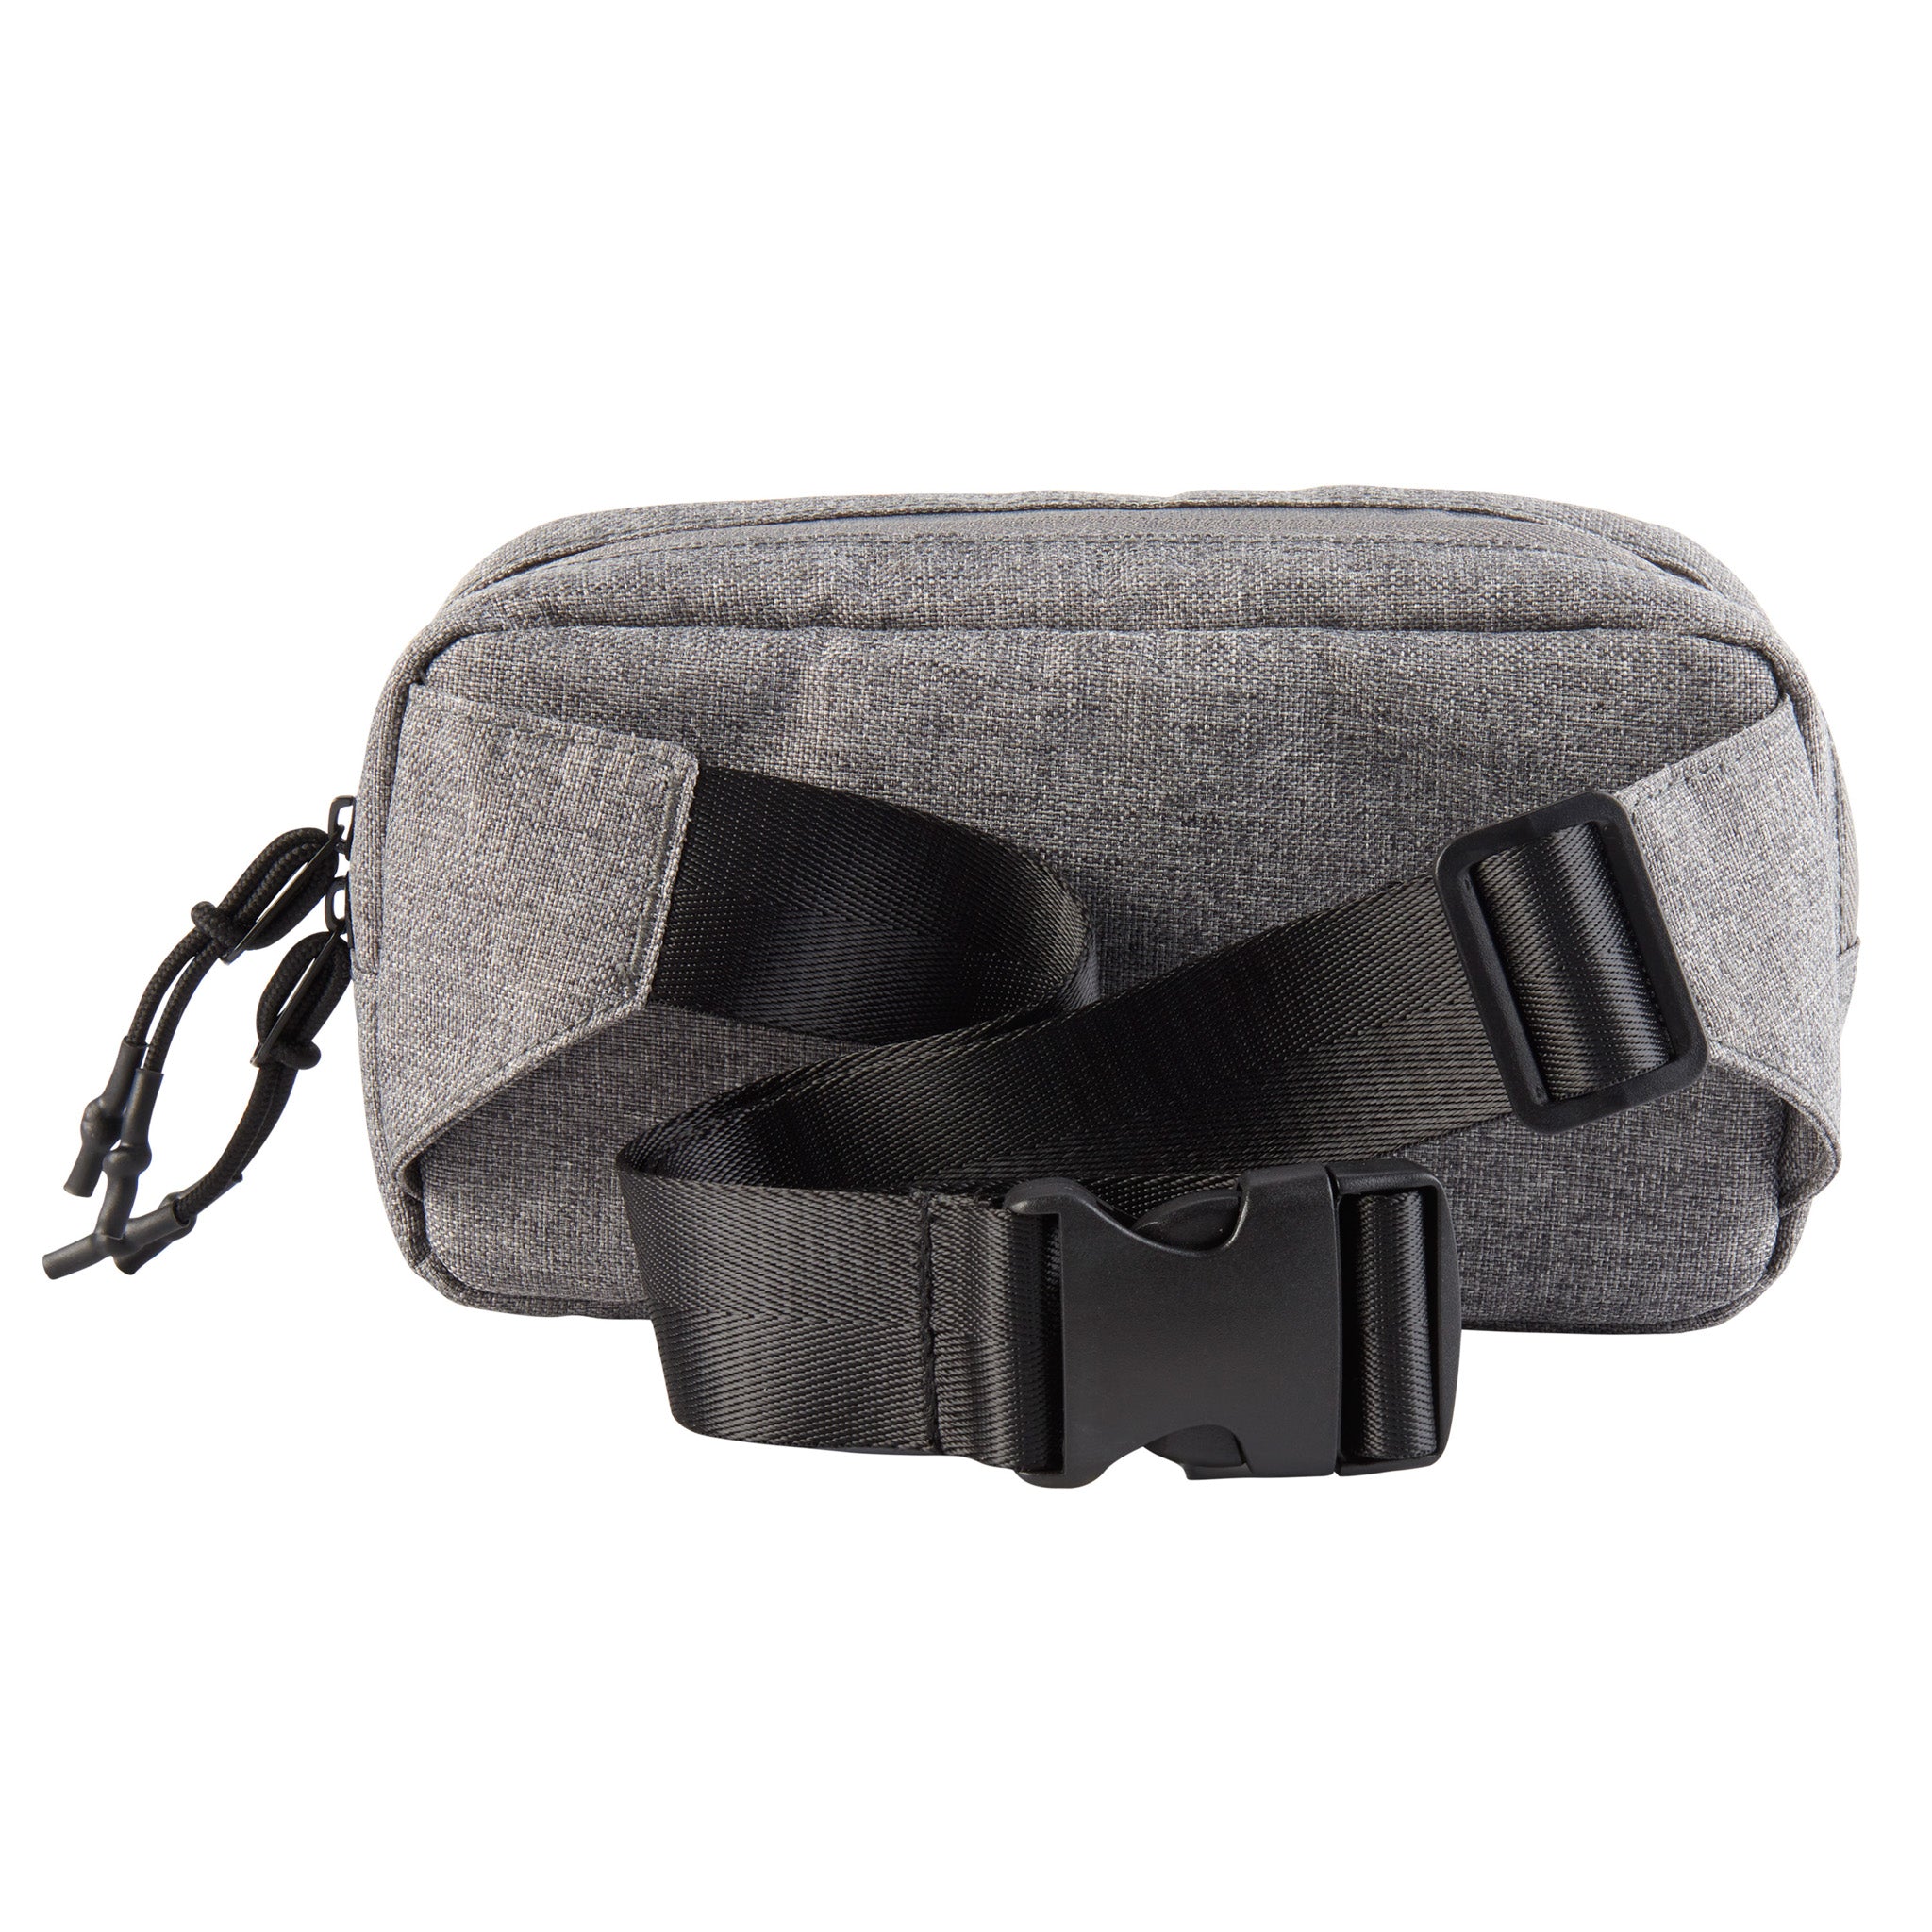 Aspect Charcoal Sling | Hex Brand - HEX